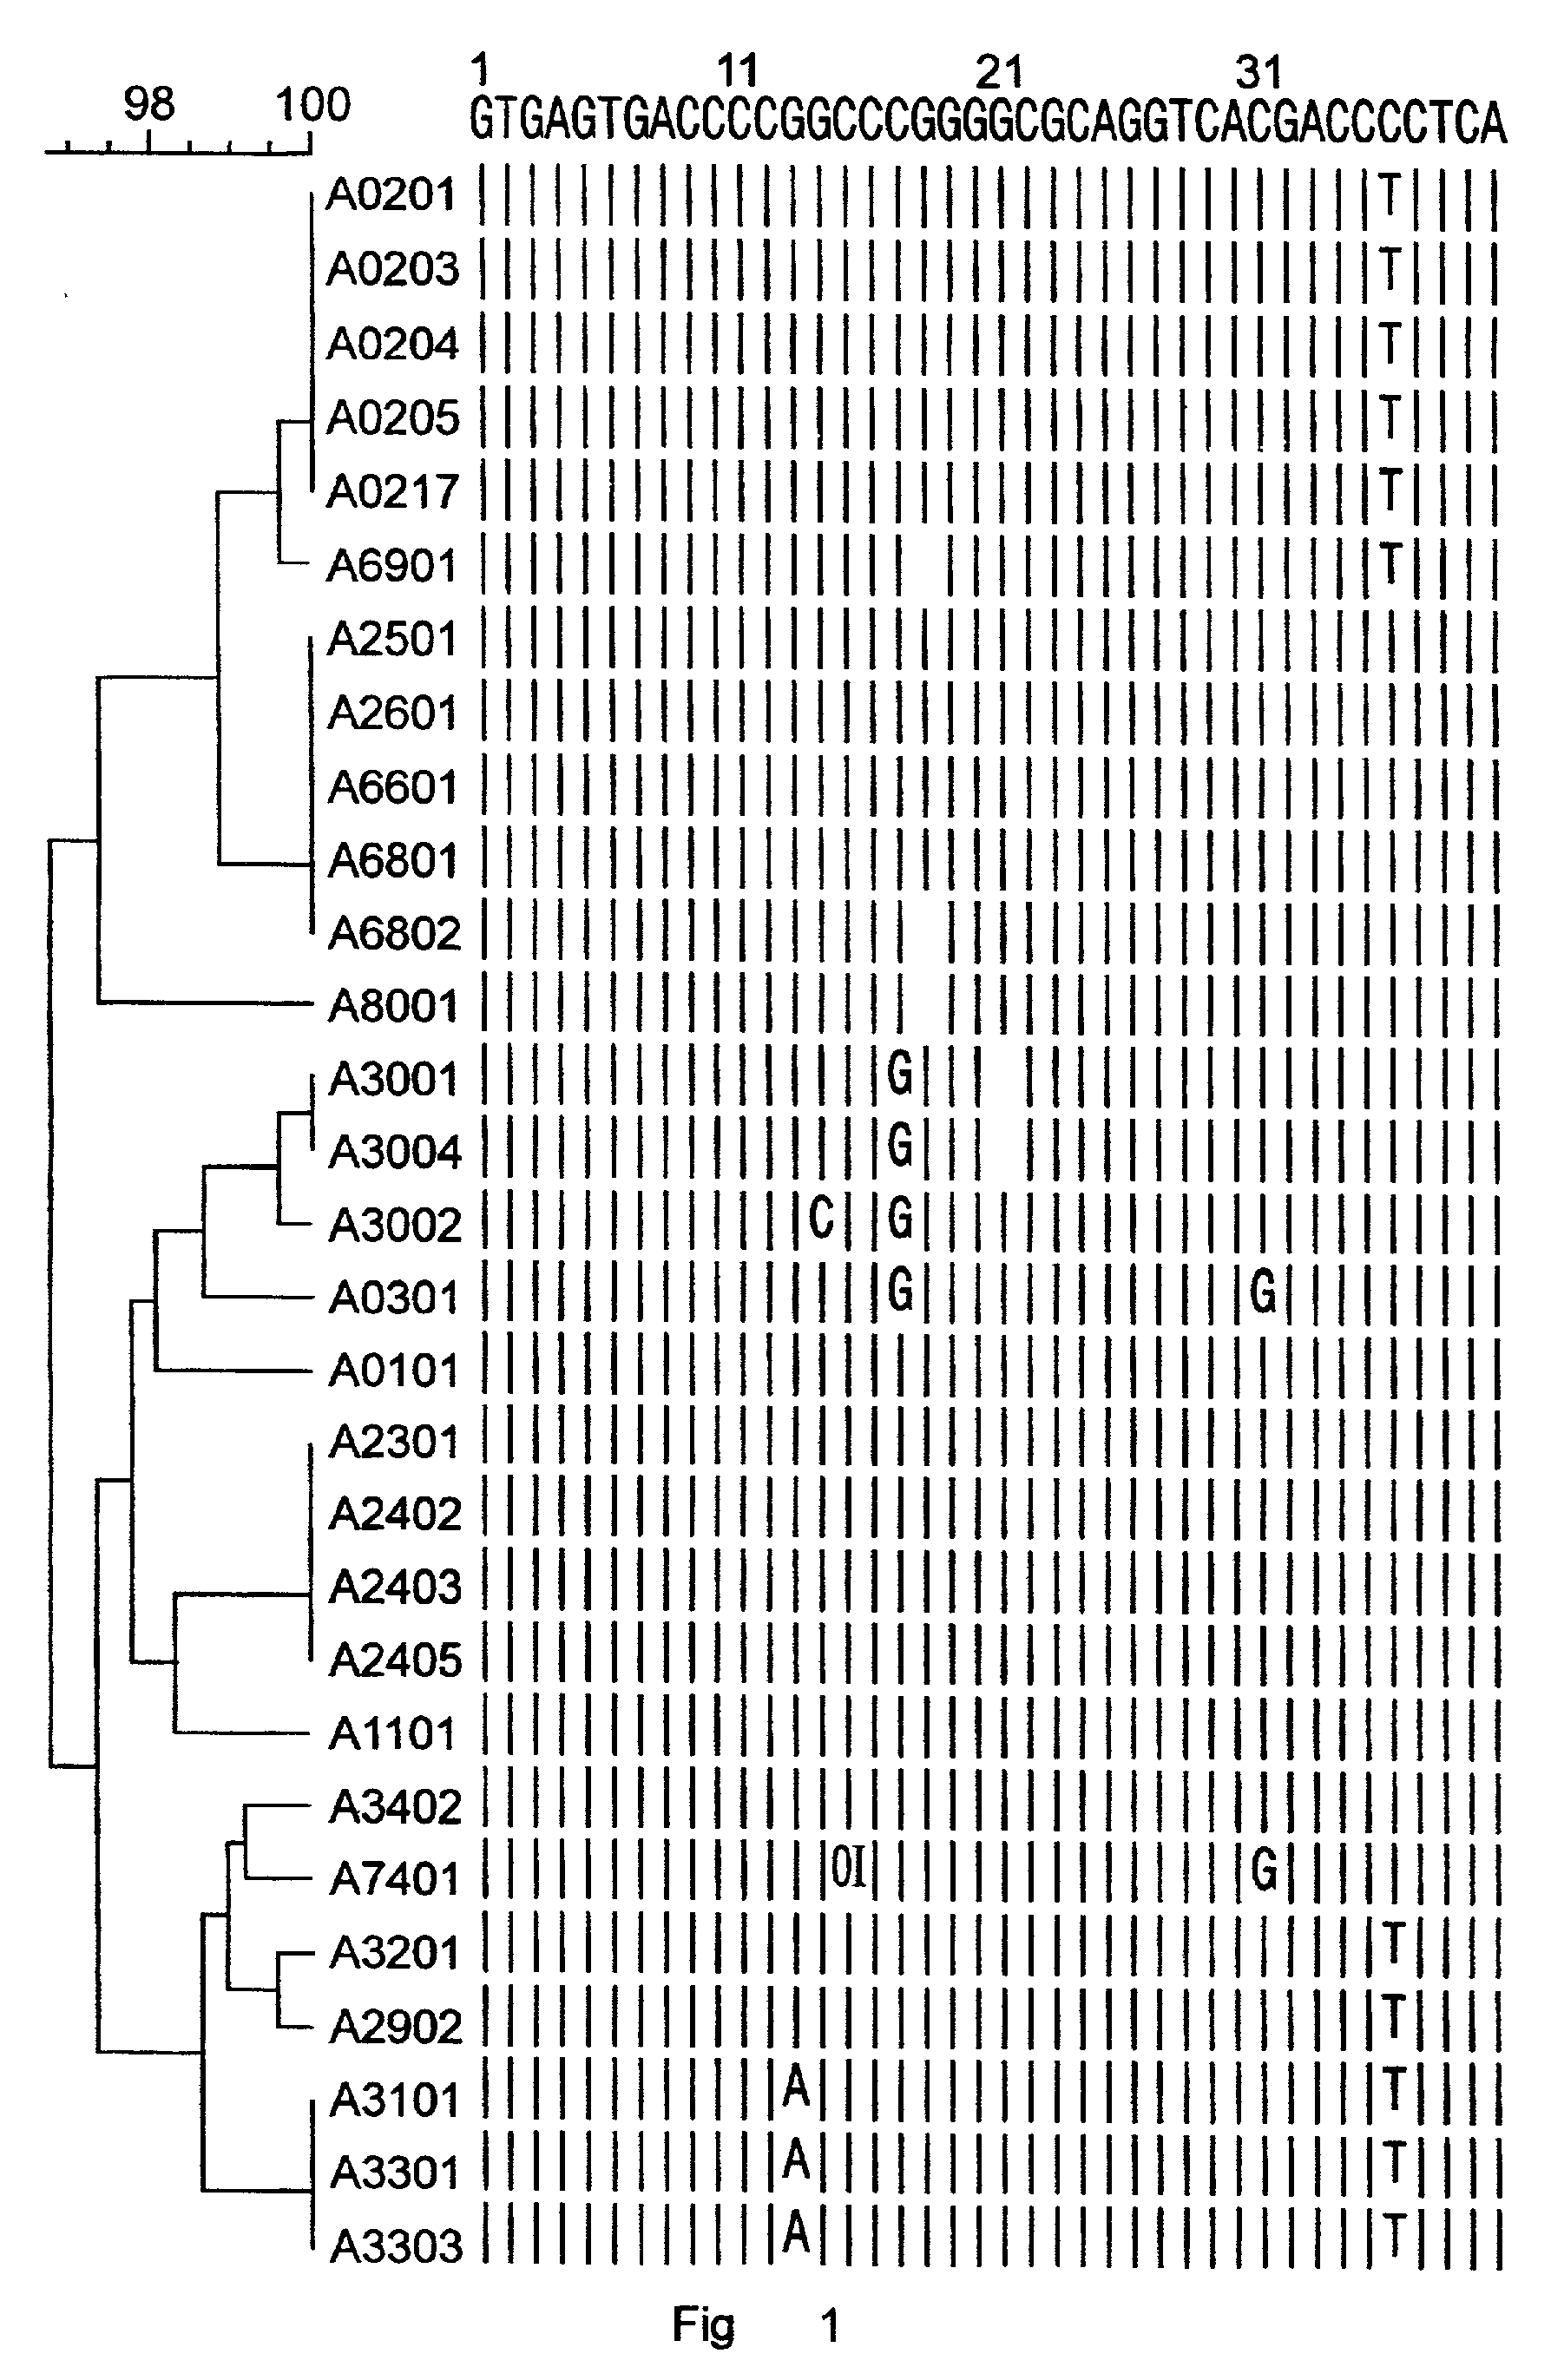 Method for the amplification of HLA class I alleles